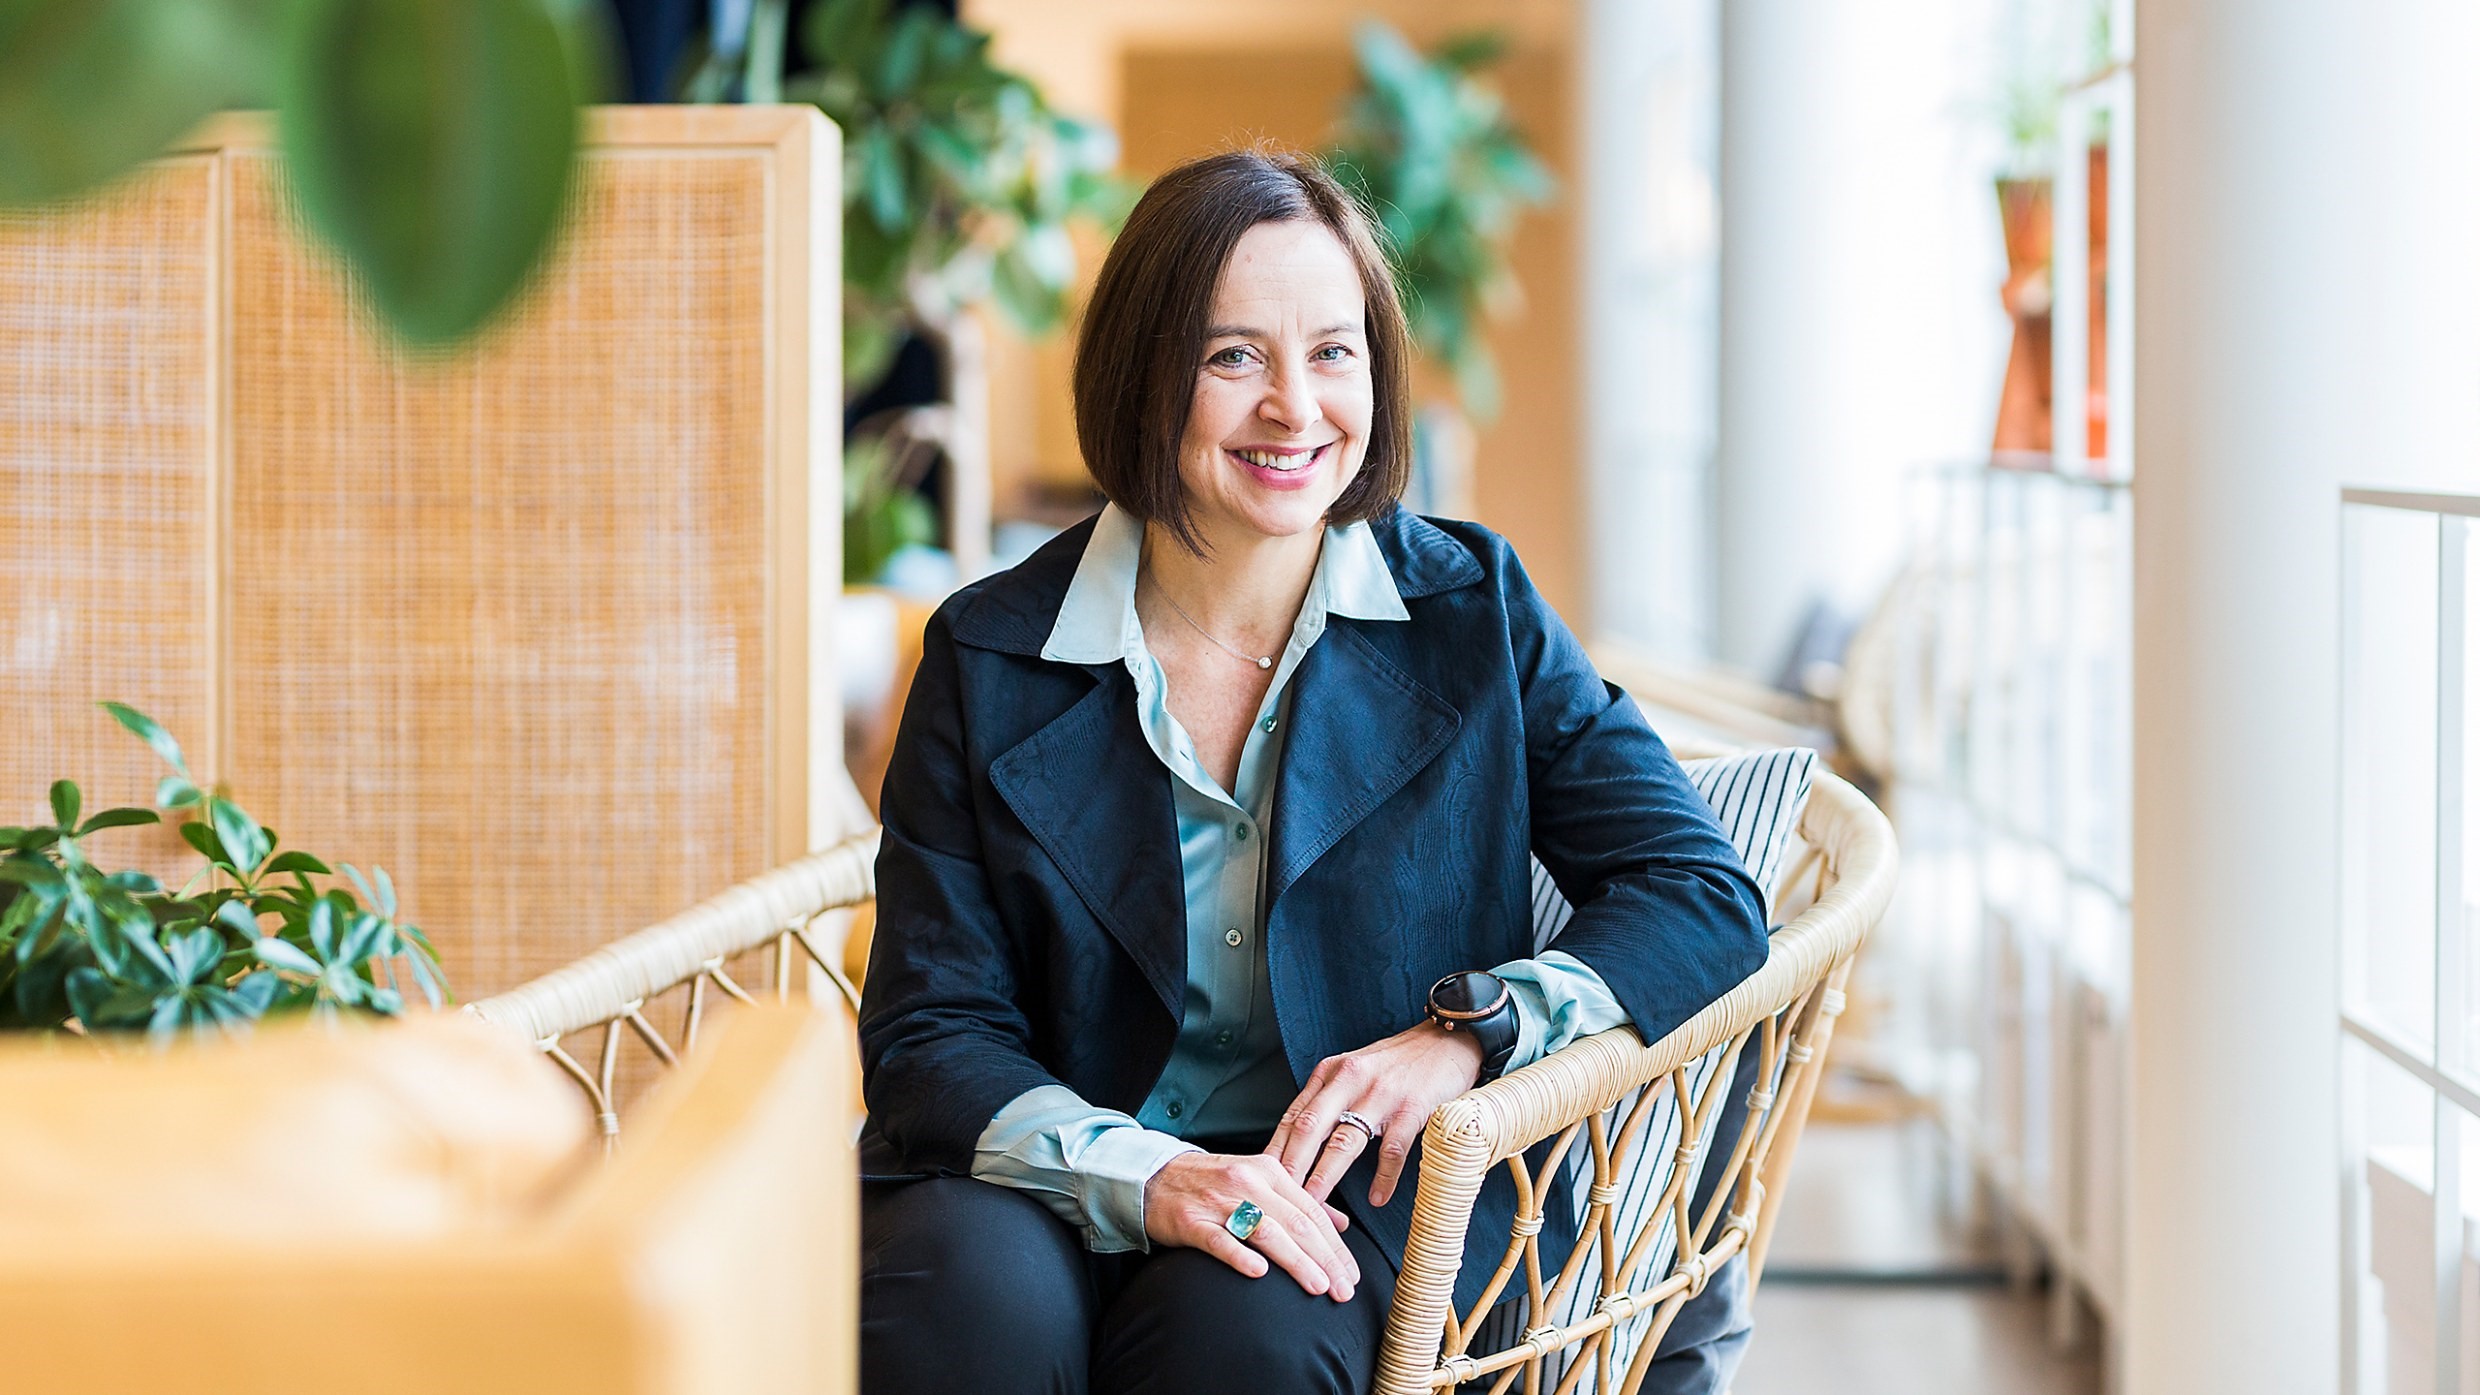 A day in the life of a chief sustainability officer: Q and A with Ikea’s Karen Pflug